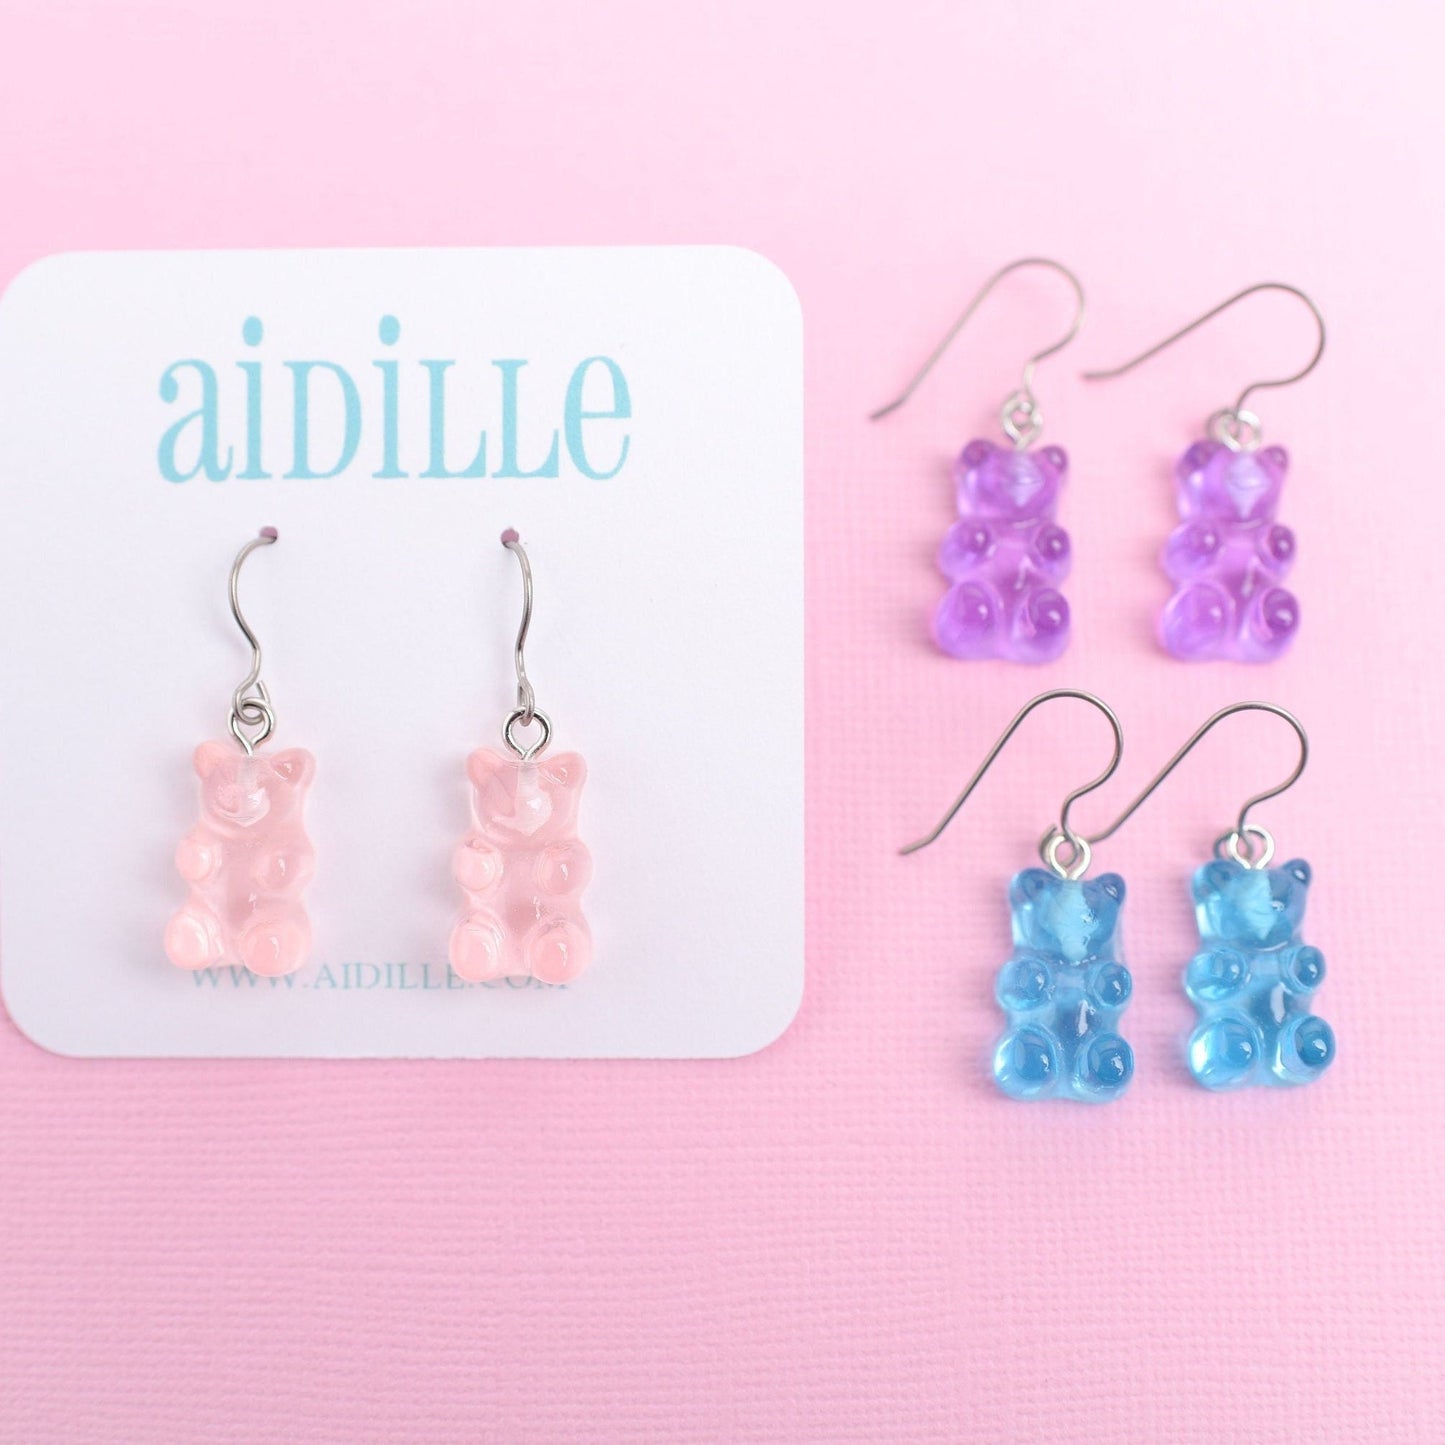 Gummy Bear Dangle Earrings with Titanium Ear Wires- Choose Pink, Purple, or Blue